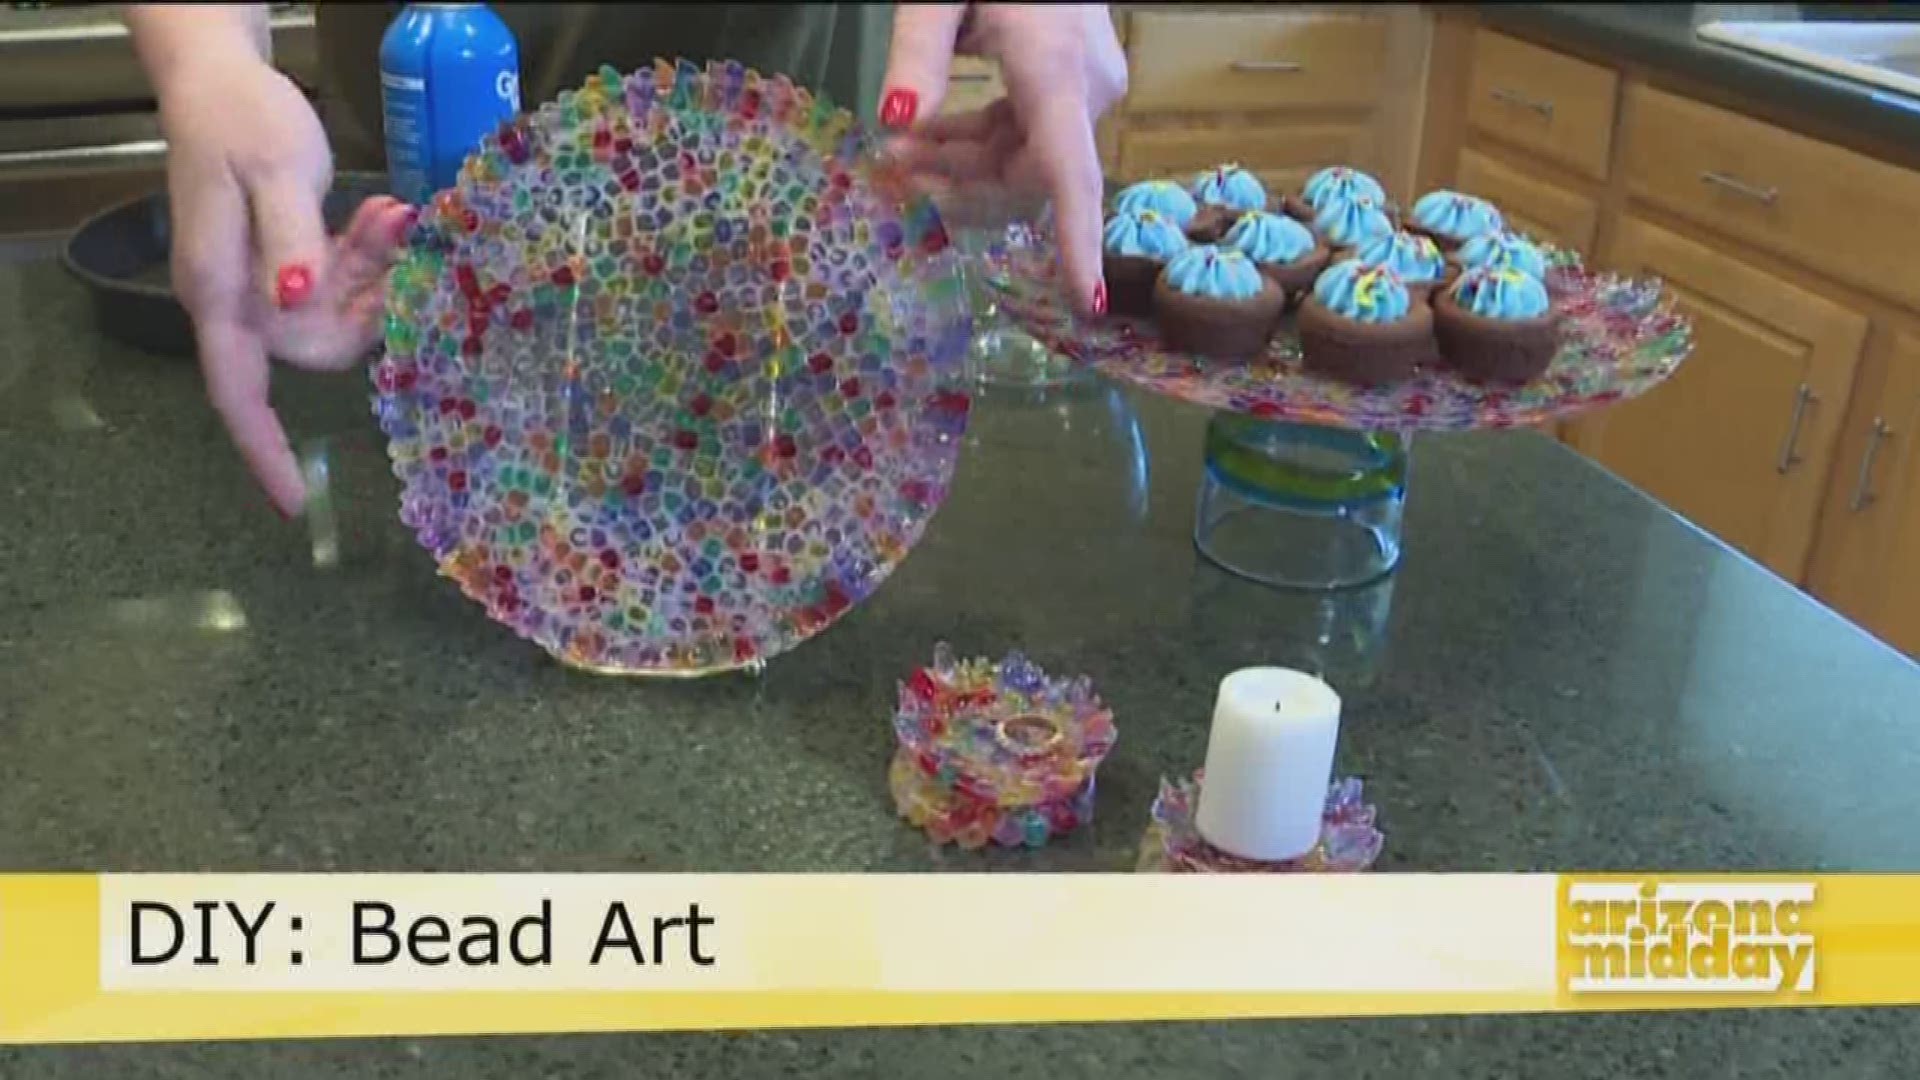 Livingacreativelife.net's Suzanne Clark shows us cute bead creations from plates to jewelry dishes